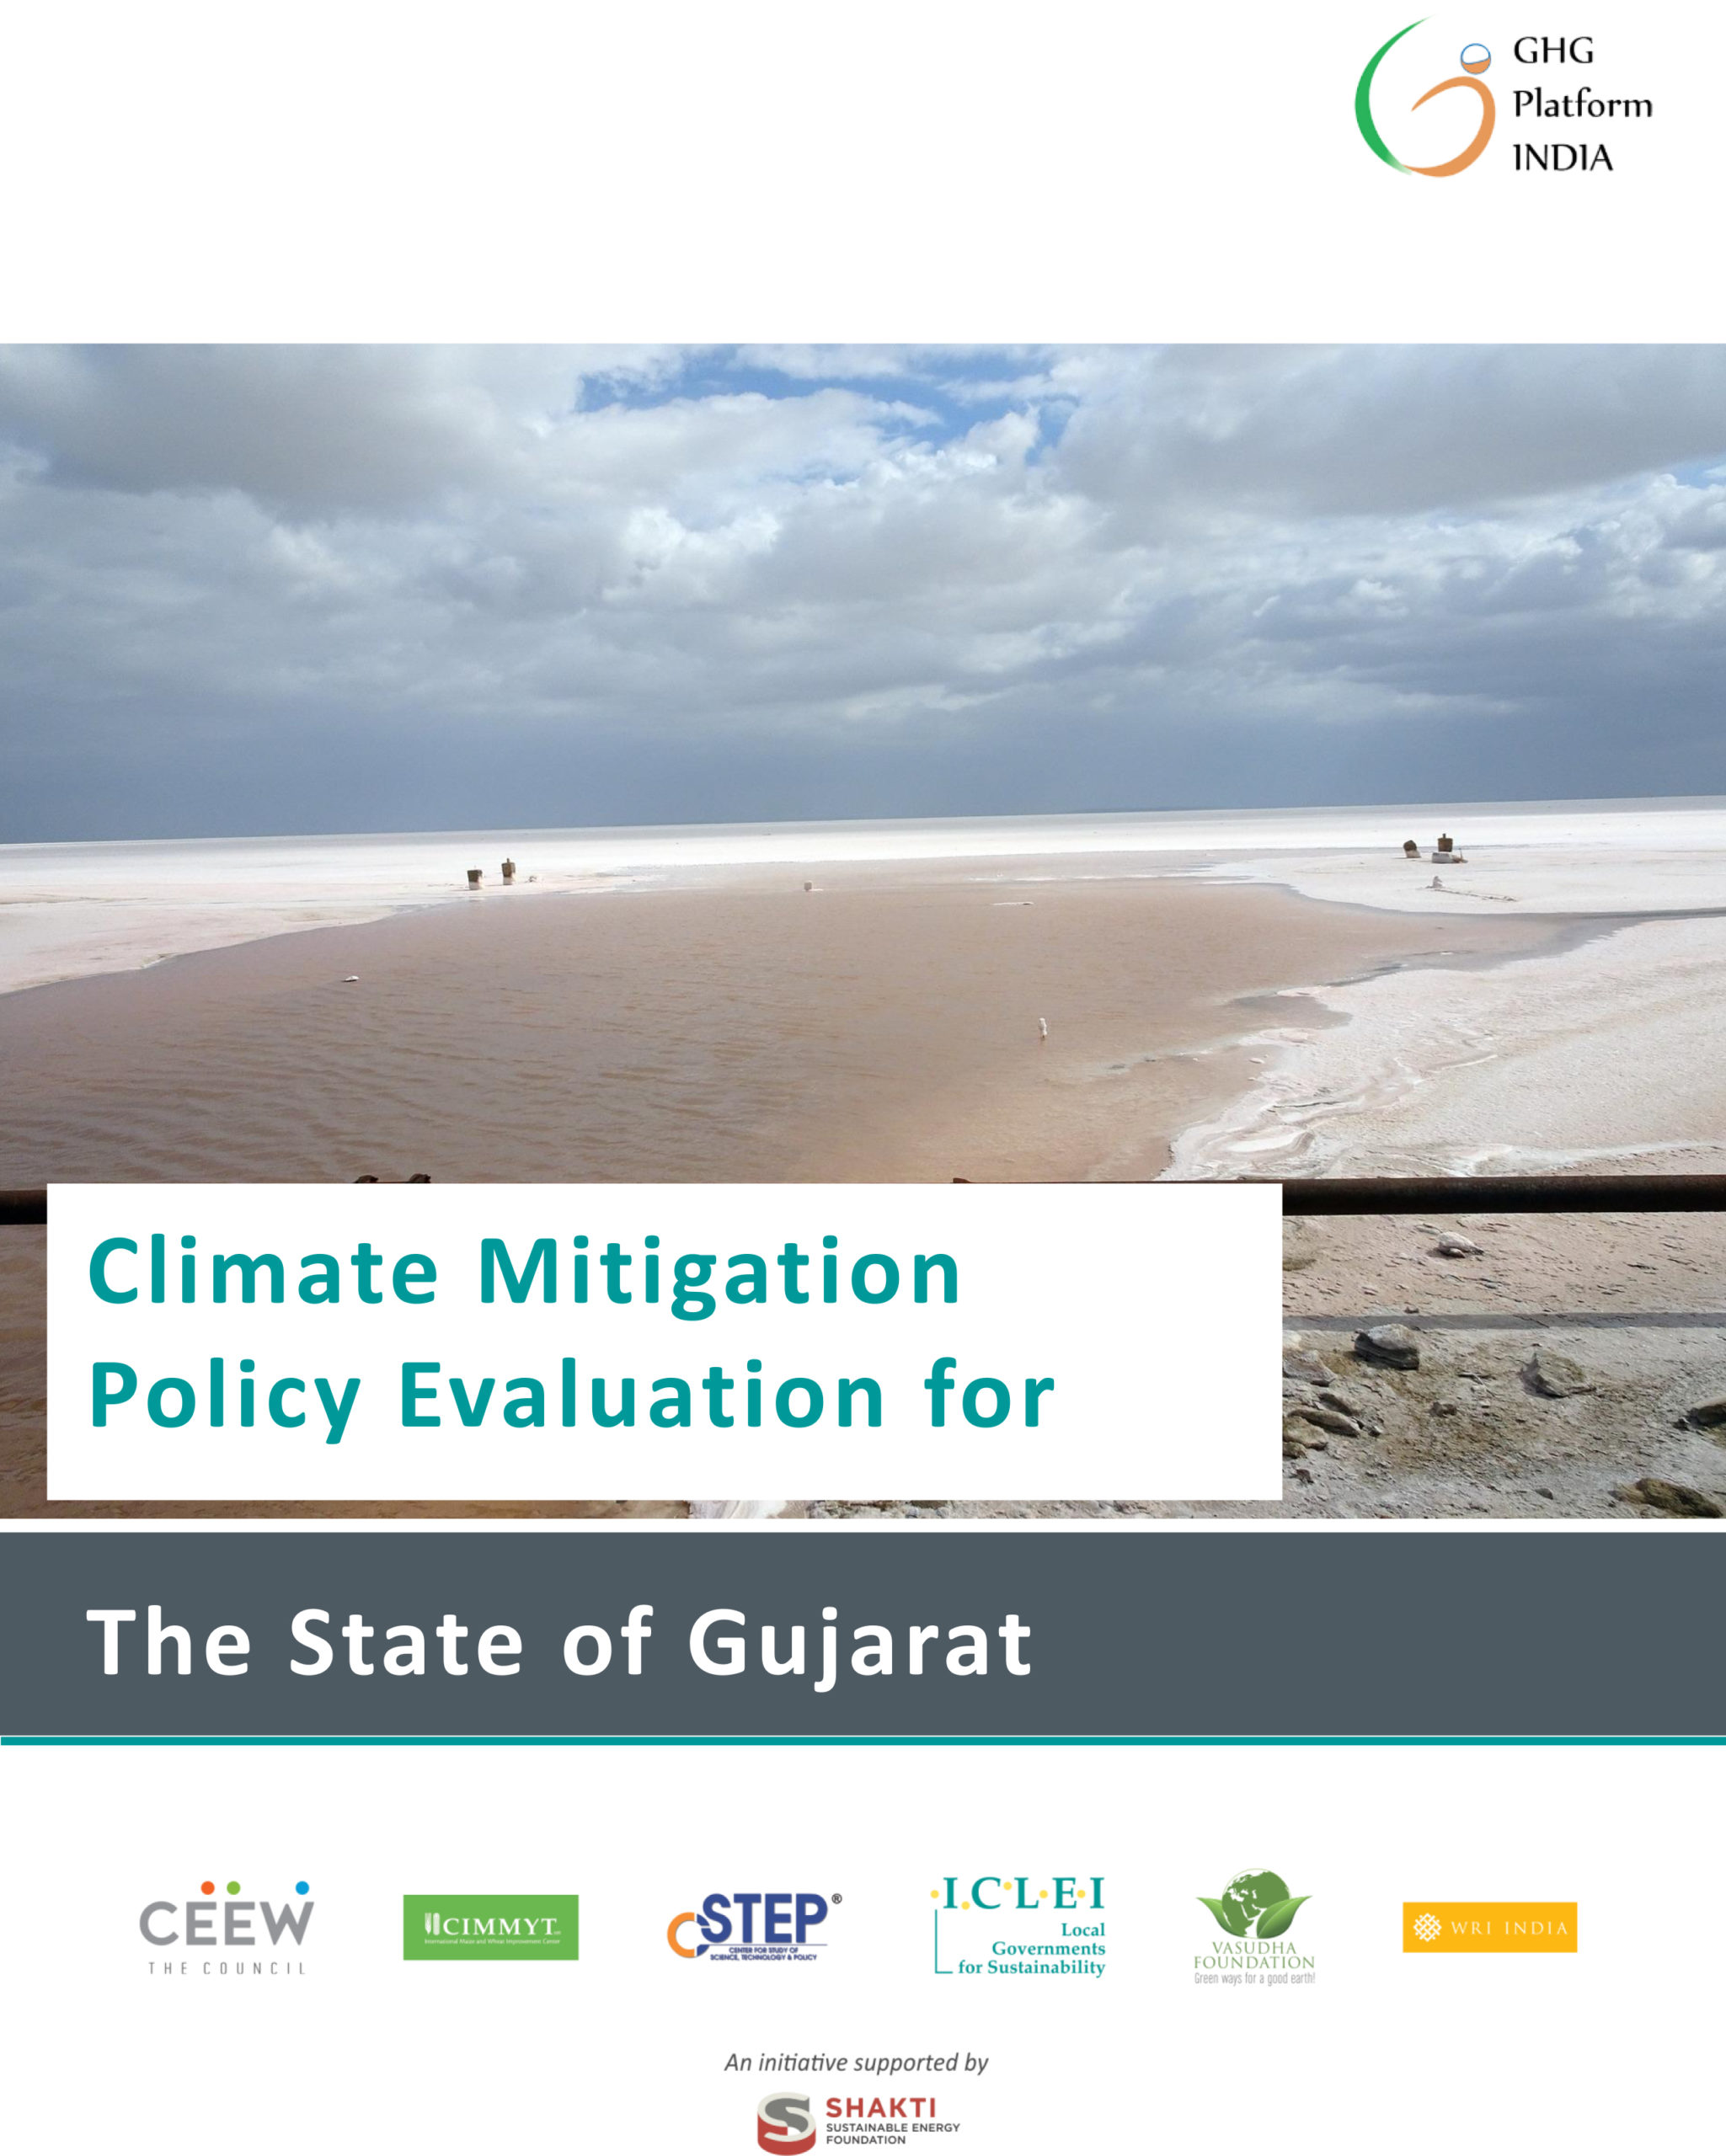 Climate Mitigation Policy Evaluation for The State of Gujarat